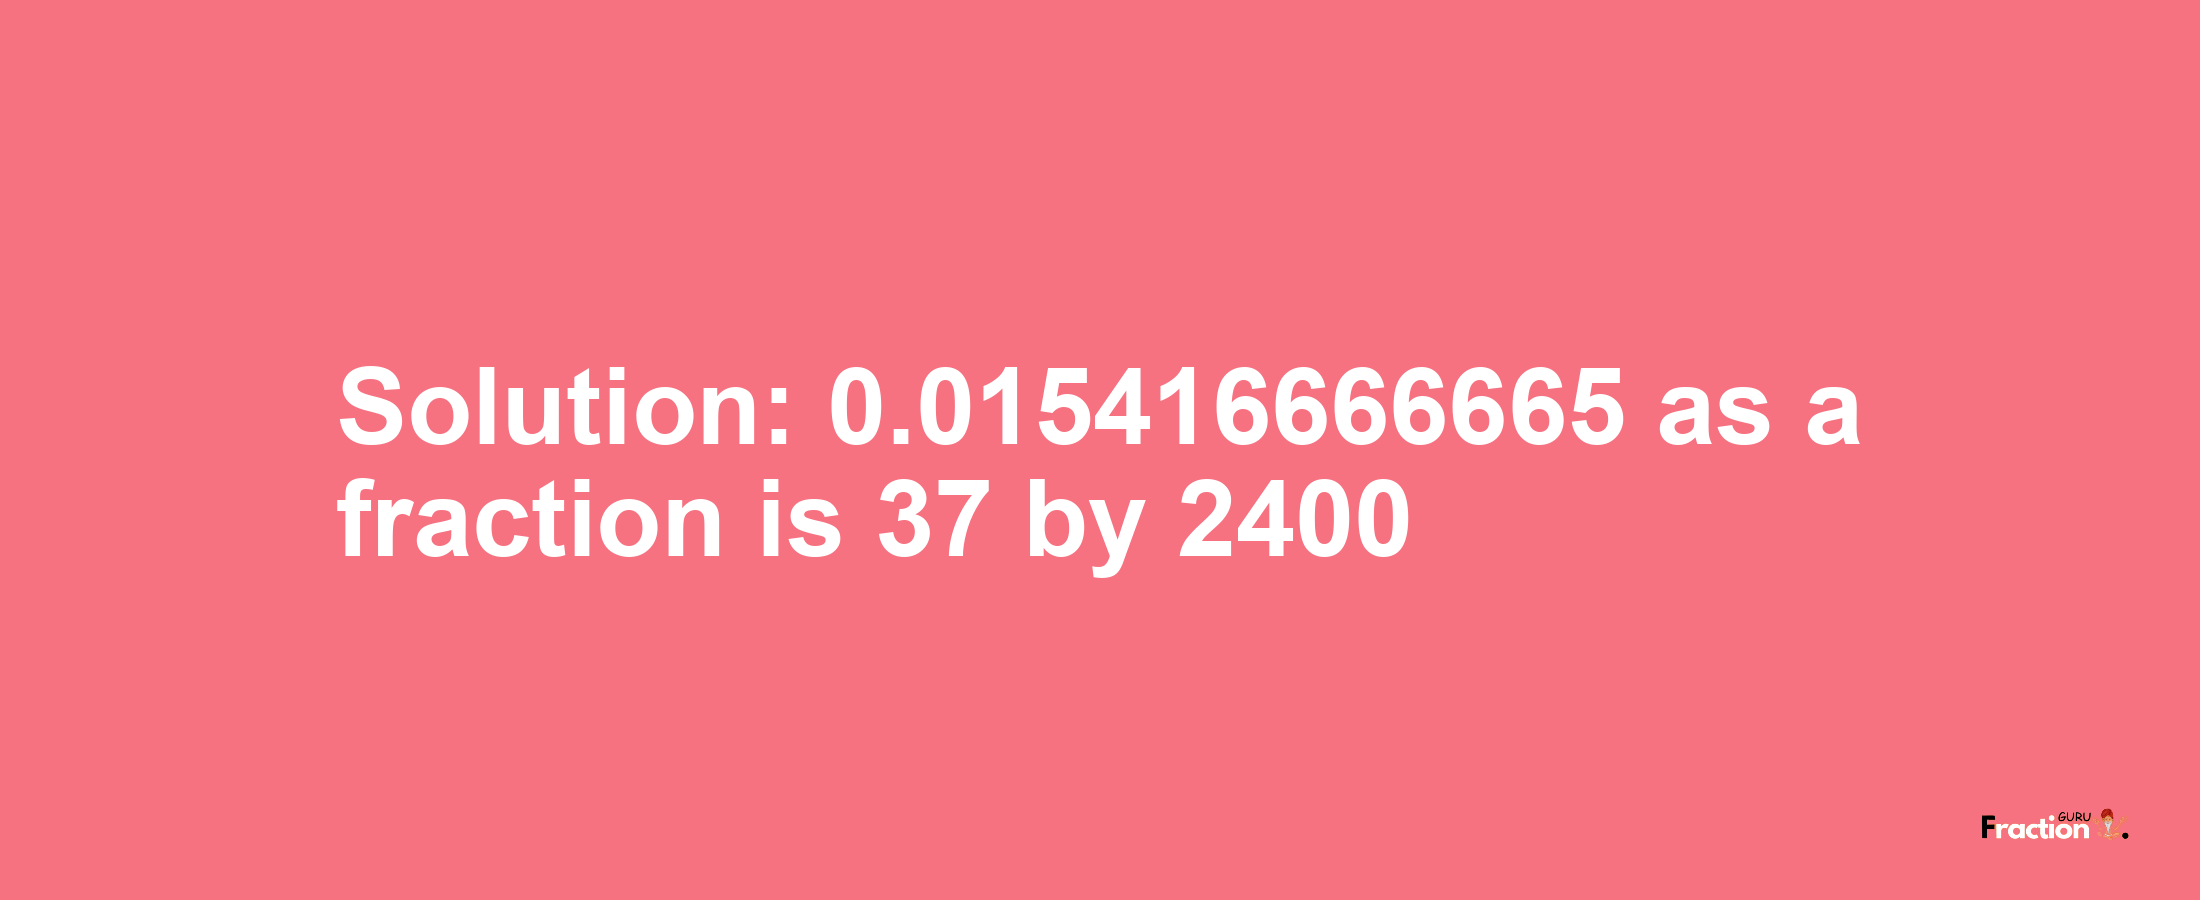 Solution:0.015416666665 as a fraction is 37/2400